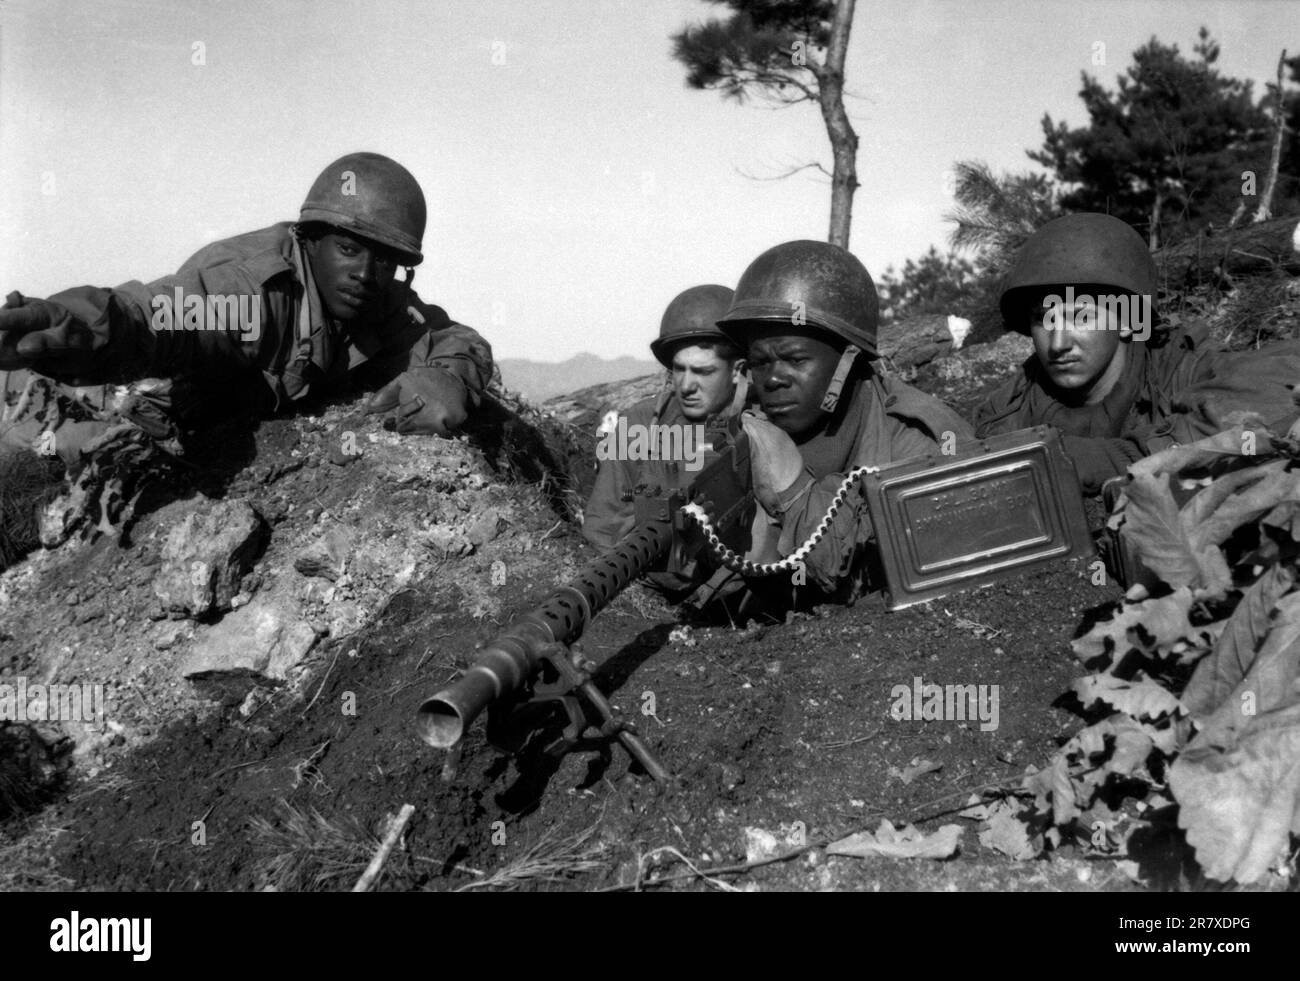 Fighting with the 2nd Infantry Division north of the Chongchon River, Sergeant Major Cleveland, weapons squad leader, points out communist-led North Korean position to his machine gun crew.  November 20, 1950. Stock Photo